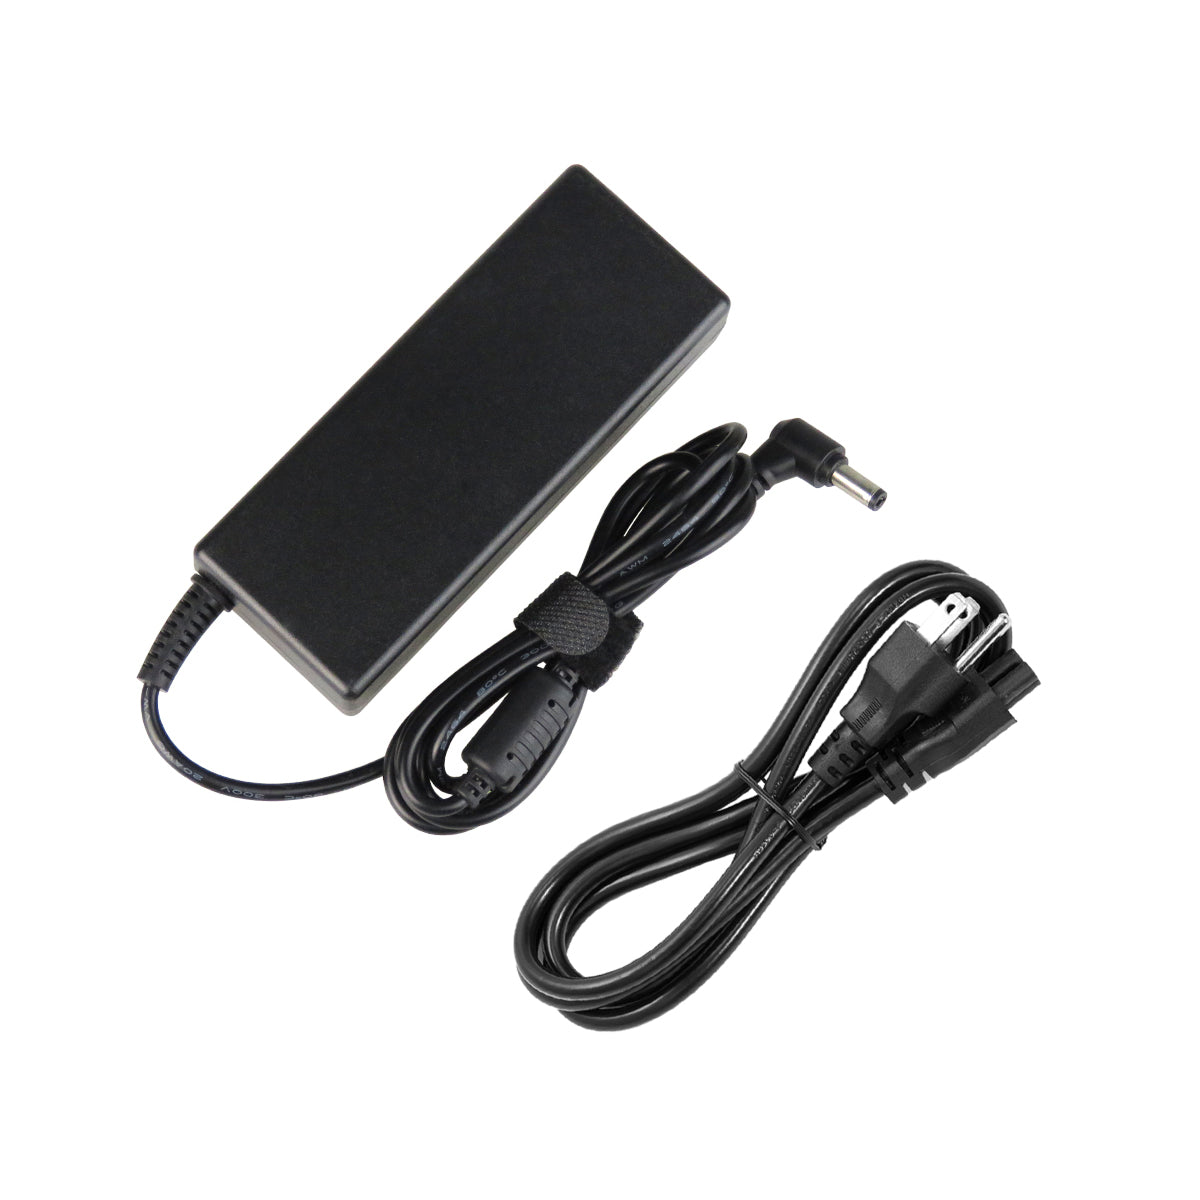 AC Adapter Charger for Gateway M-6800 Notebook.